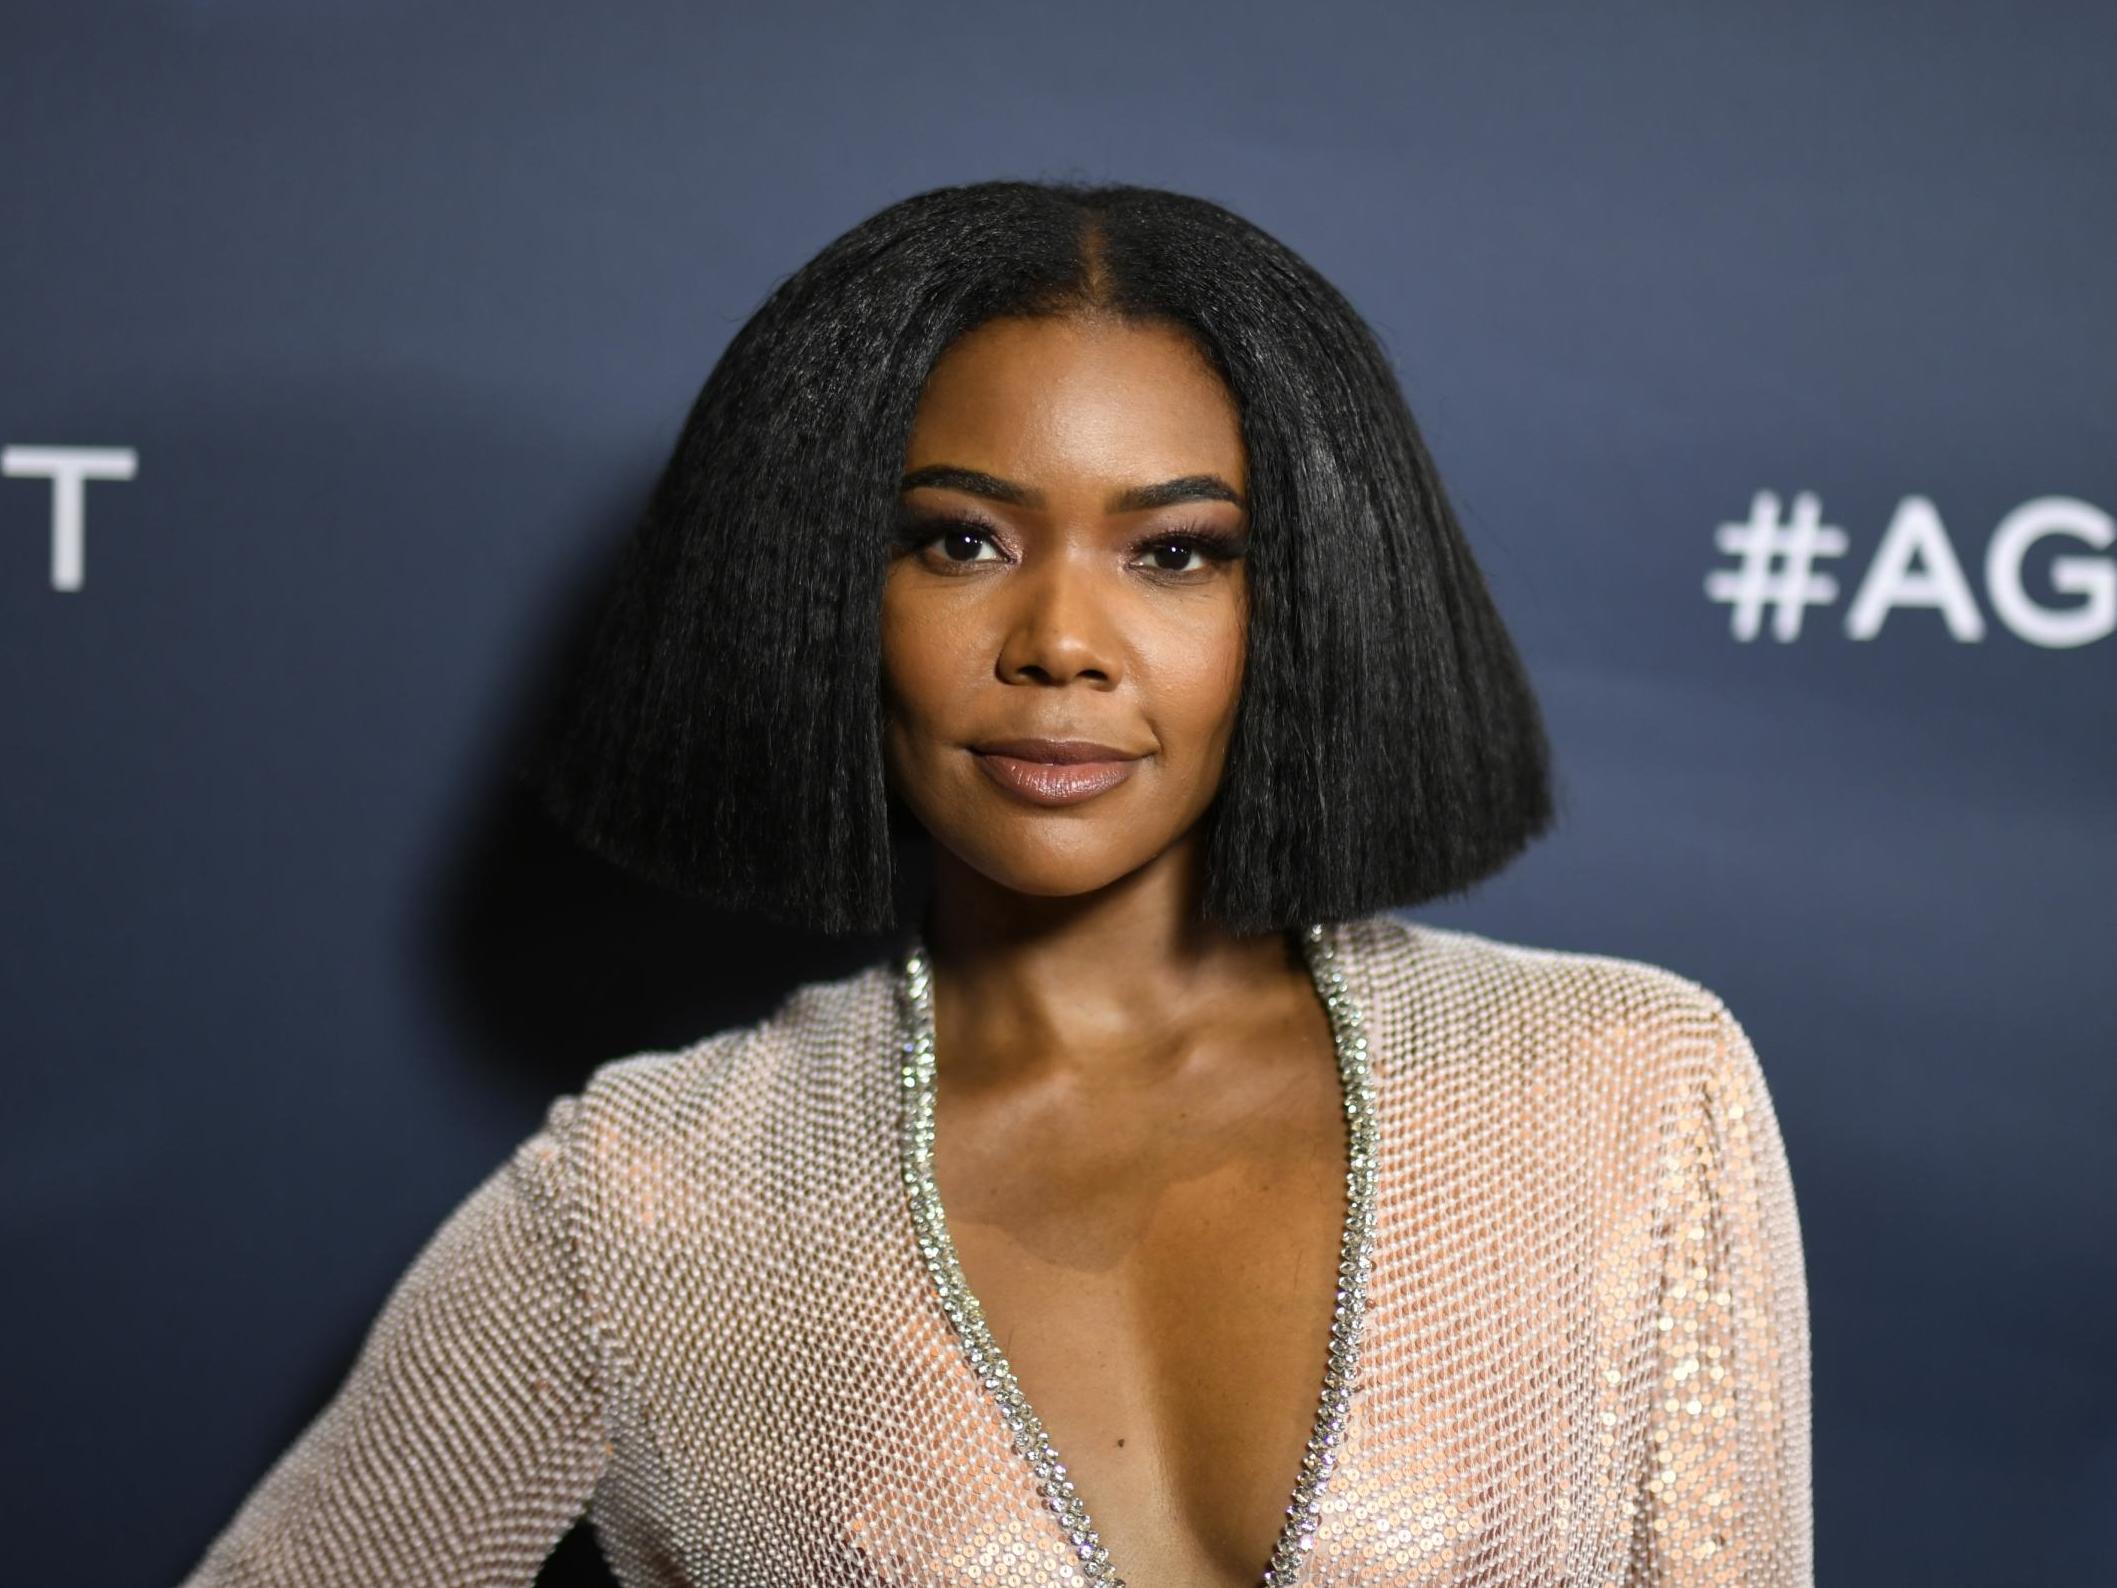 America's Got Talent judge Gabrielle Union inspires revival of  #BlackHairChallenge after being 'told hairstyle changes were too black' |  The Independent